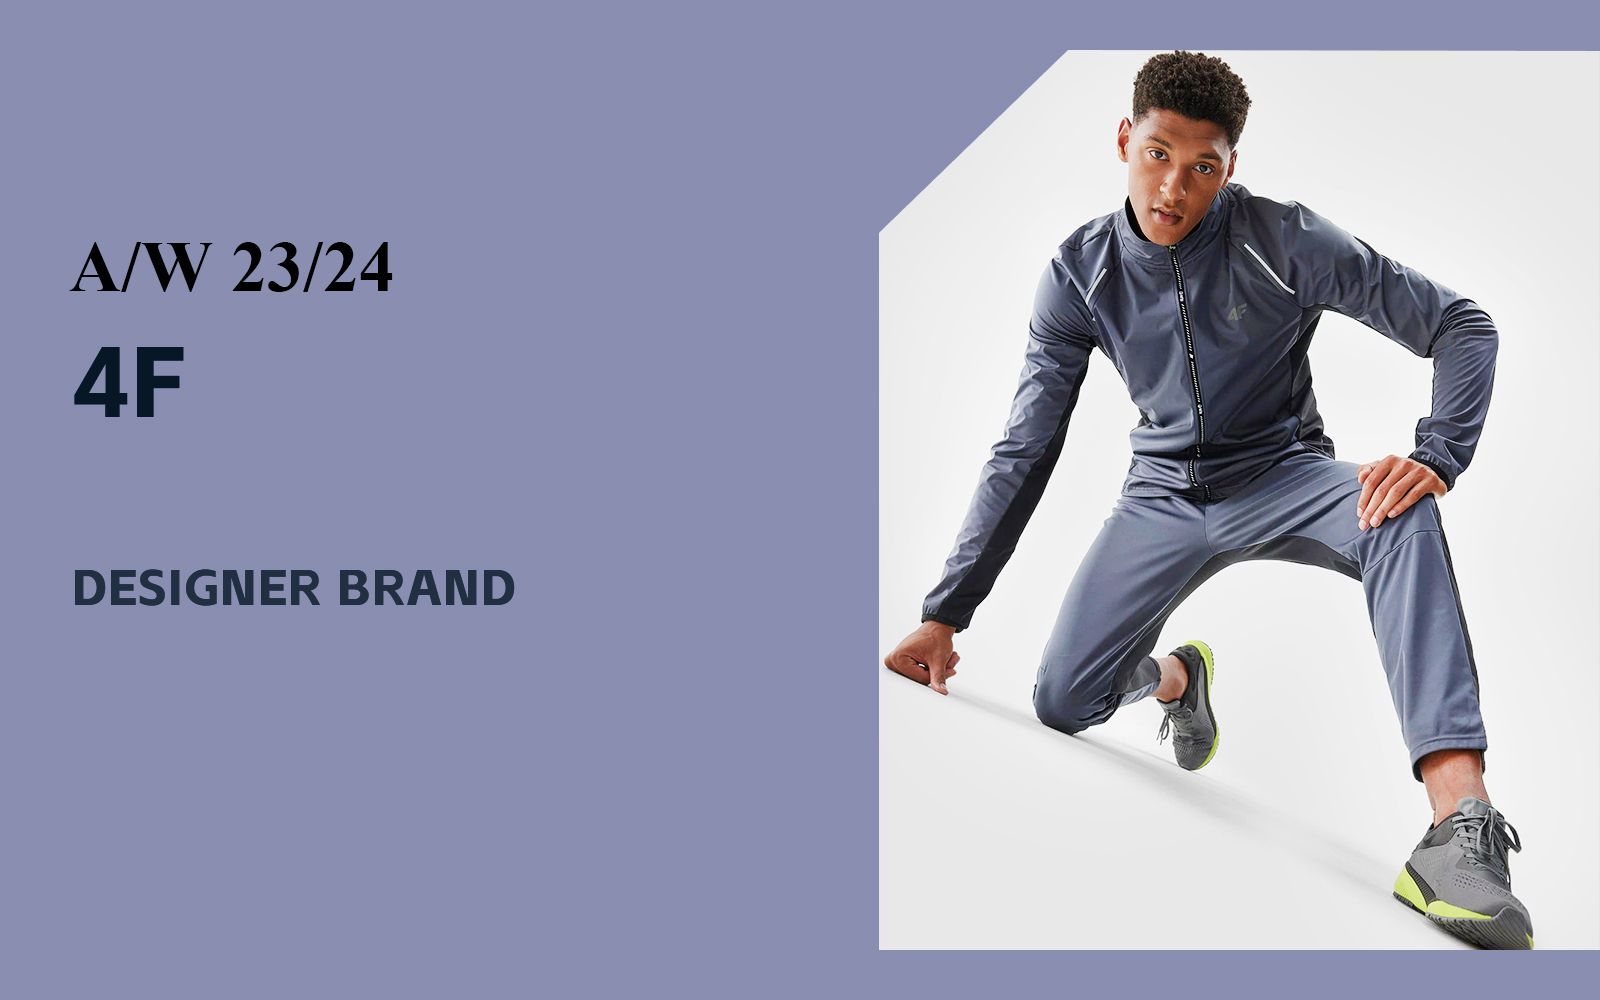 Comfortable Fitness -- The Analysis of 4F The Activewear Designer Brand